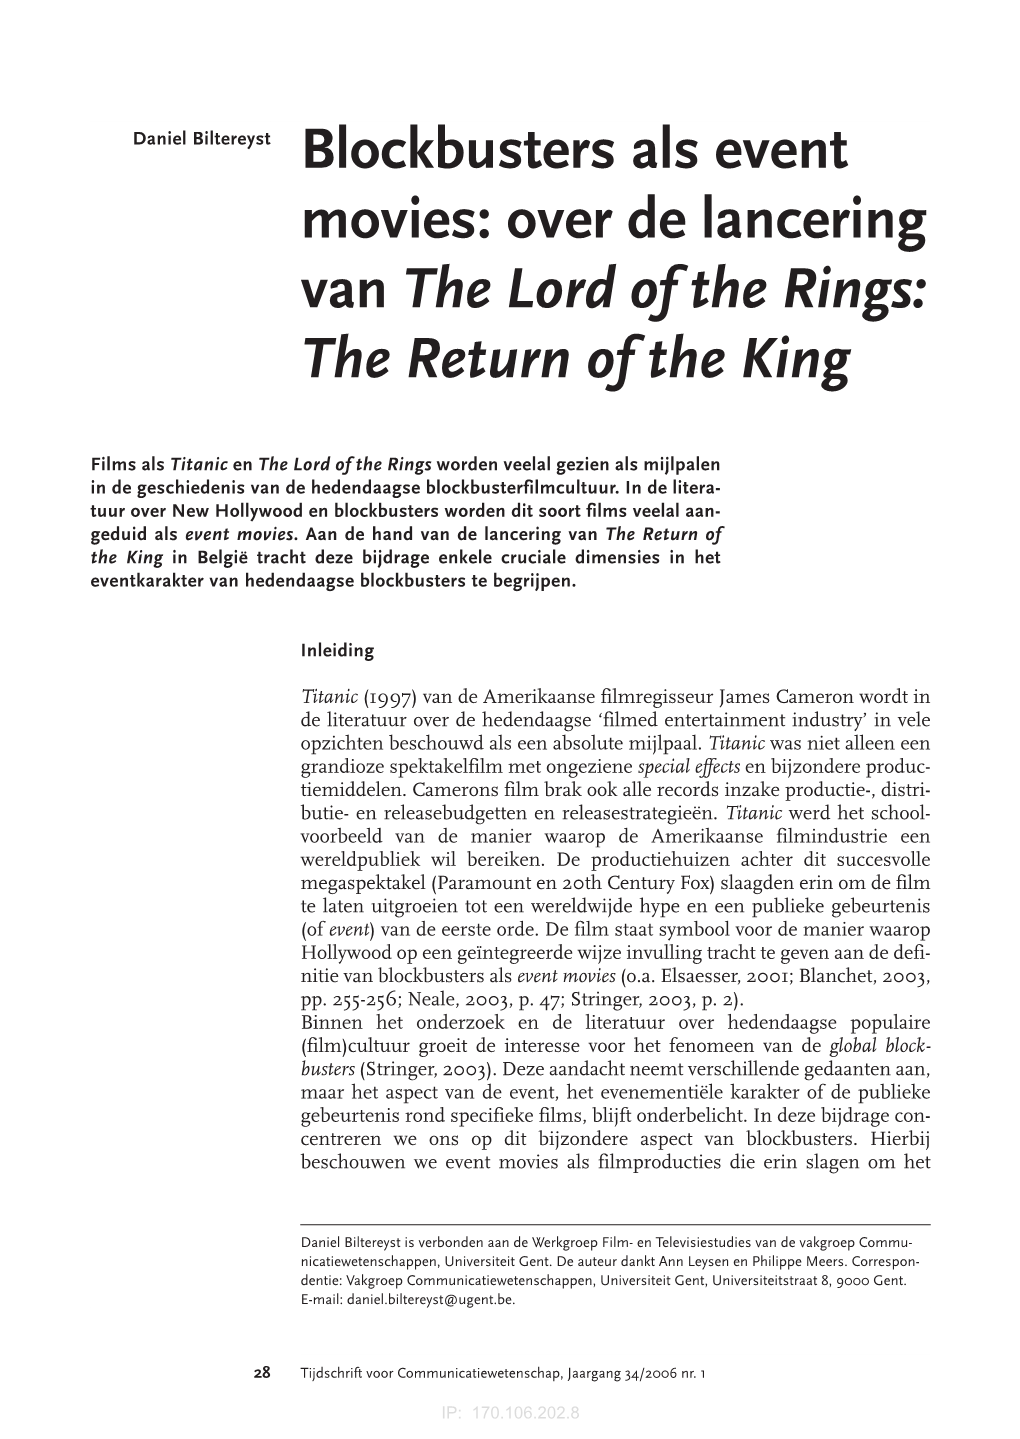 Blockbusters Als Event Movies: Over De Lancering Van the Lord of the Rings: the Return of the King